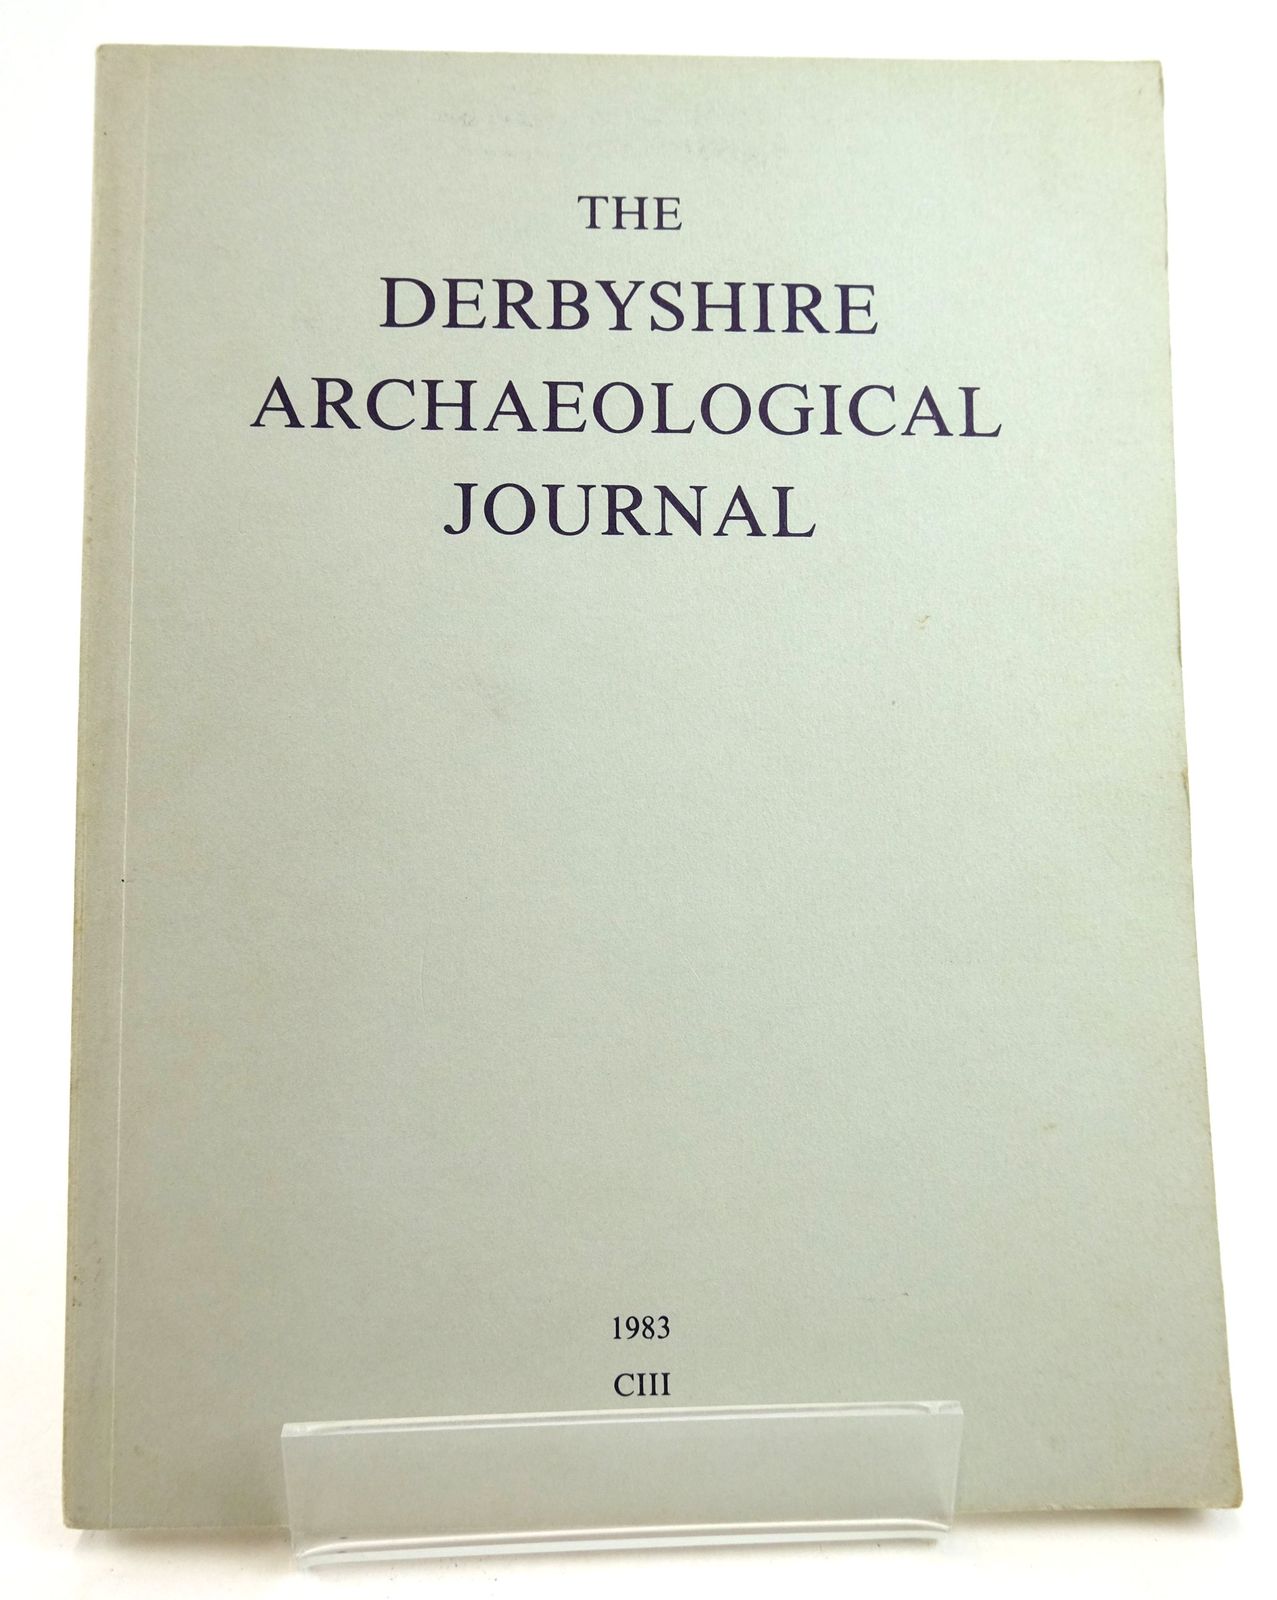 Photo of THE DERBYSHIRE ARCHAEOLOGICAL JOURNAL VOLUME CIII FOR THE YEAR 1983 written by Barker, Graeme Fowkes, D.V. published by Moorland Publishing (STOCK CODE: 1819478)  for sale by Stella & Rose's Books